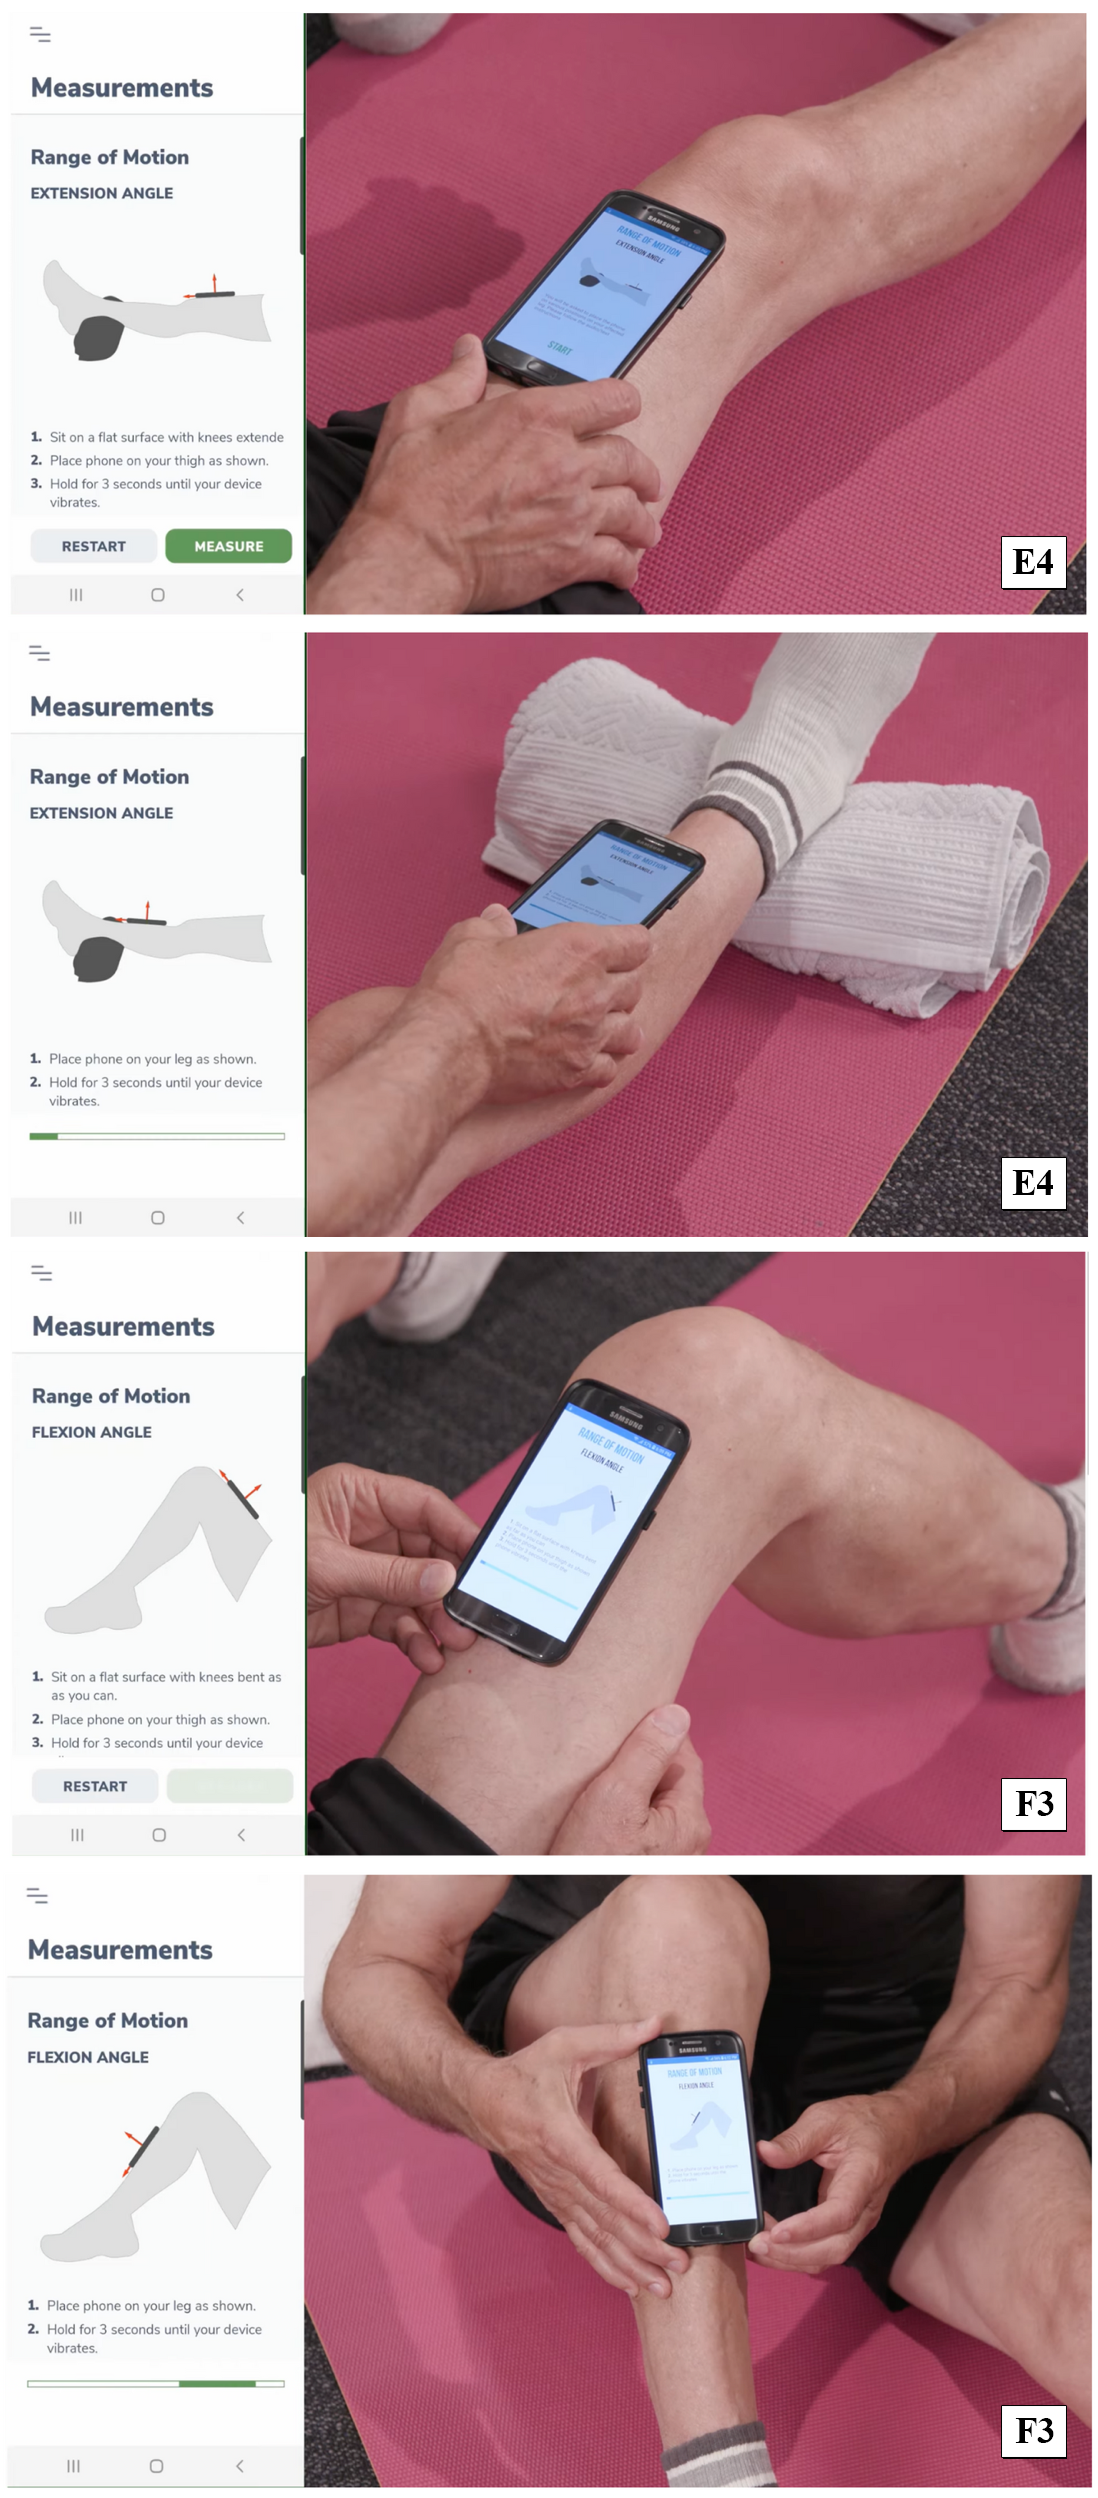 Can a Patient use an App at Home to Measure Knee Range of Motion? Utilizing  a Mobile App, Curovate, to Improve Access and Adherence to Knee Range of Motion  Measurements